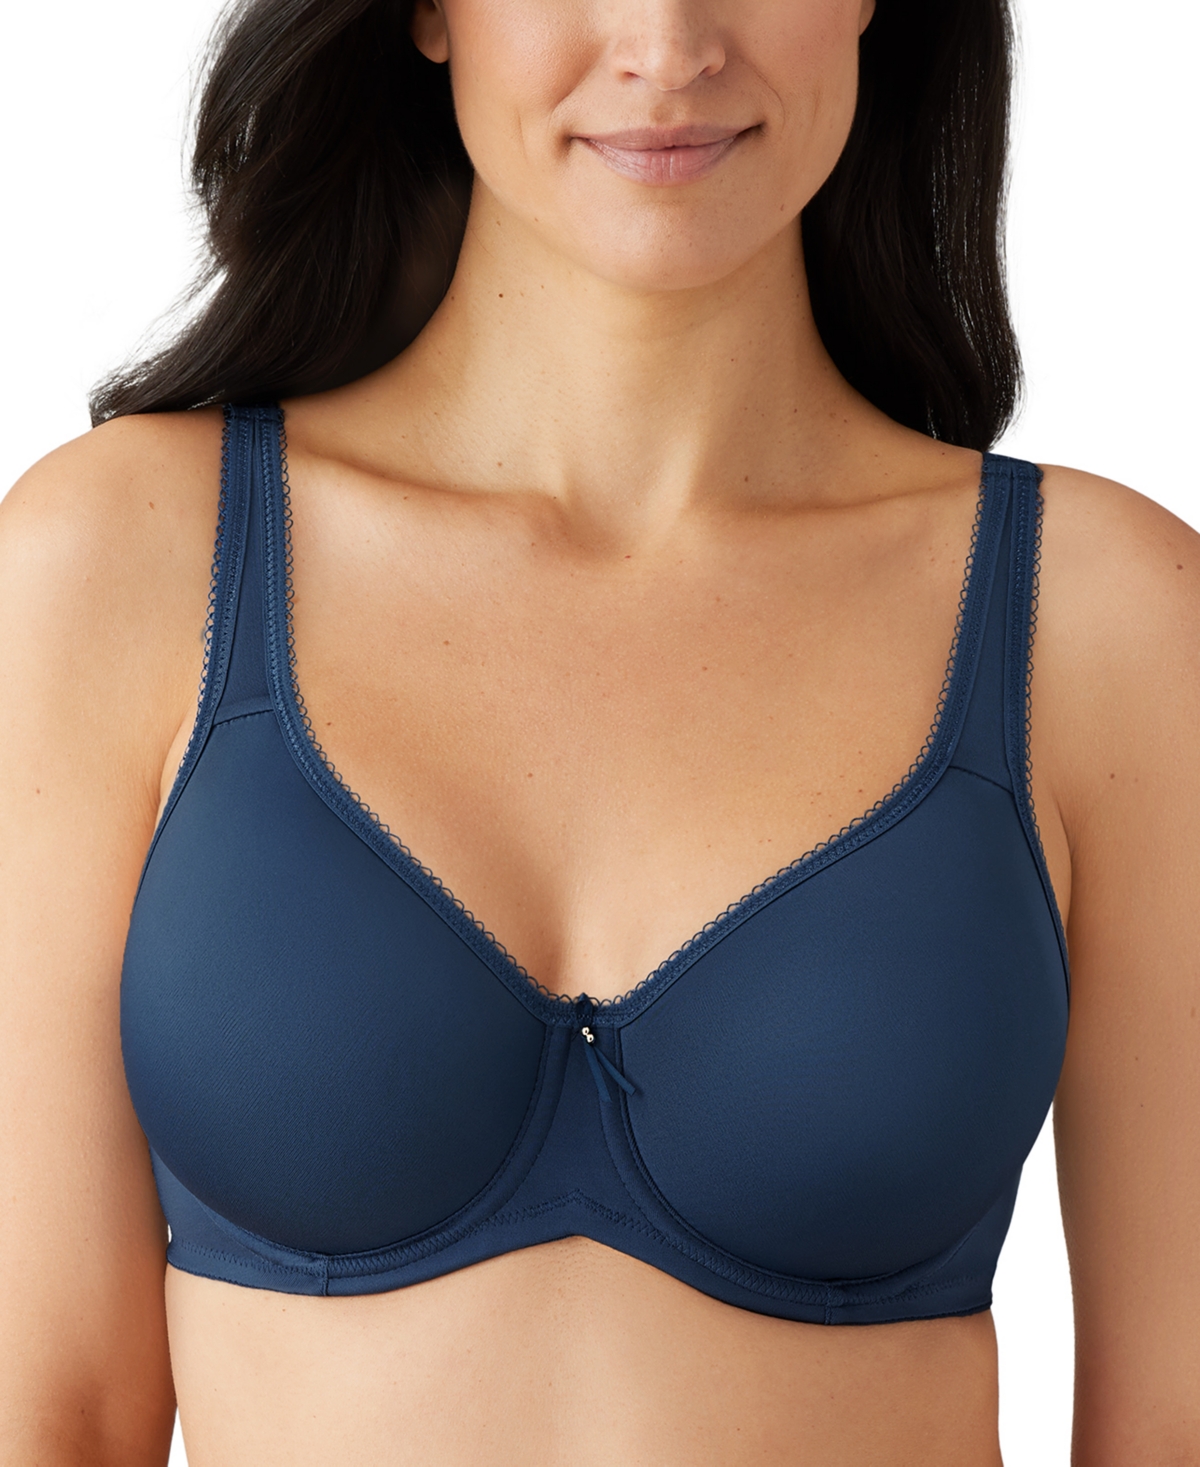 Wacoal Basic Beauty Spacer Underwire T-shirt Bra In Sargasso Sea